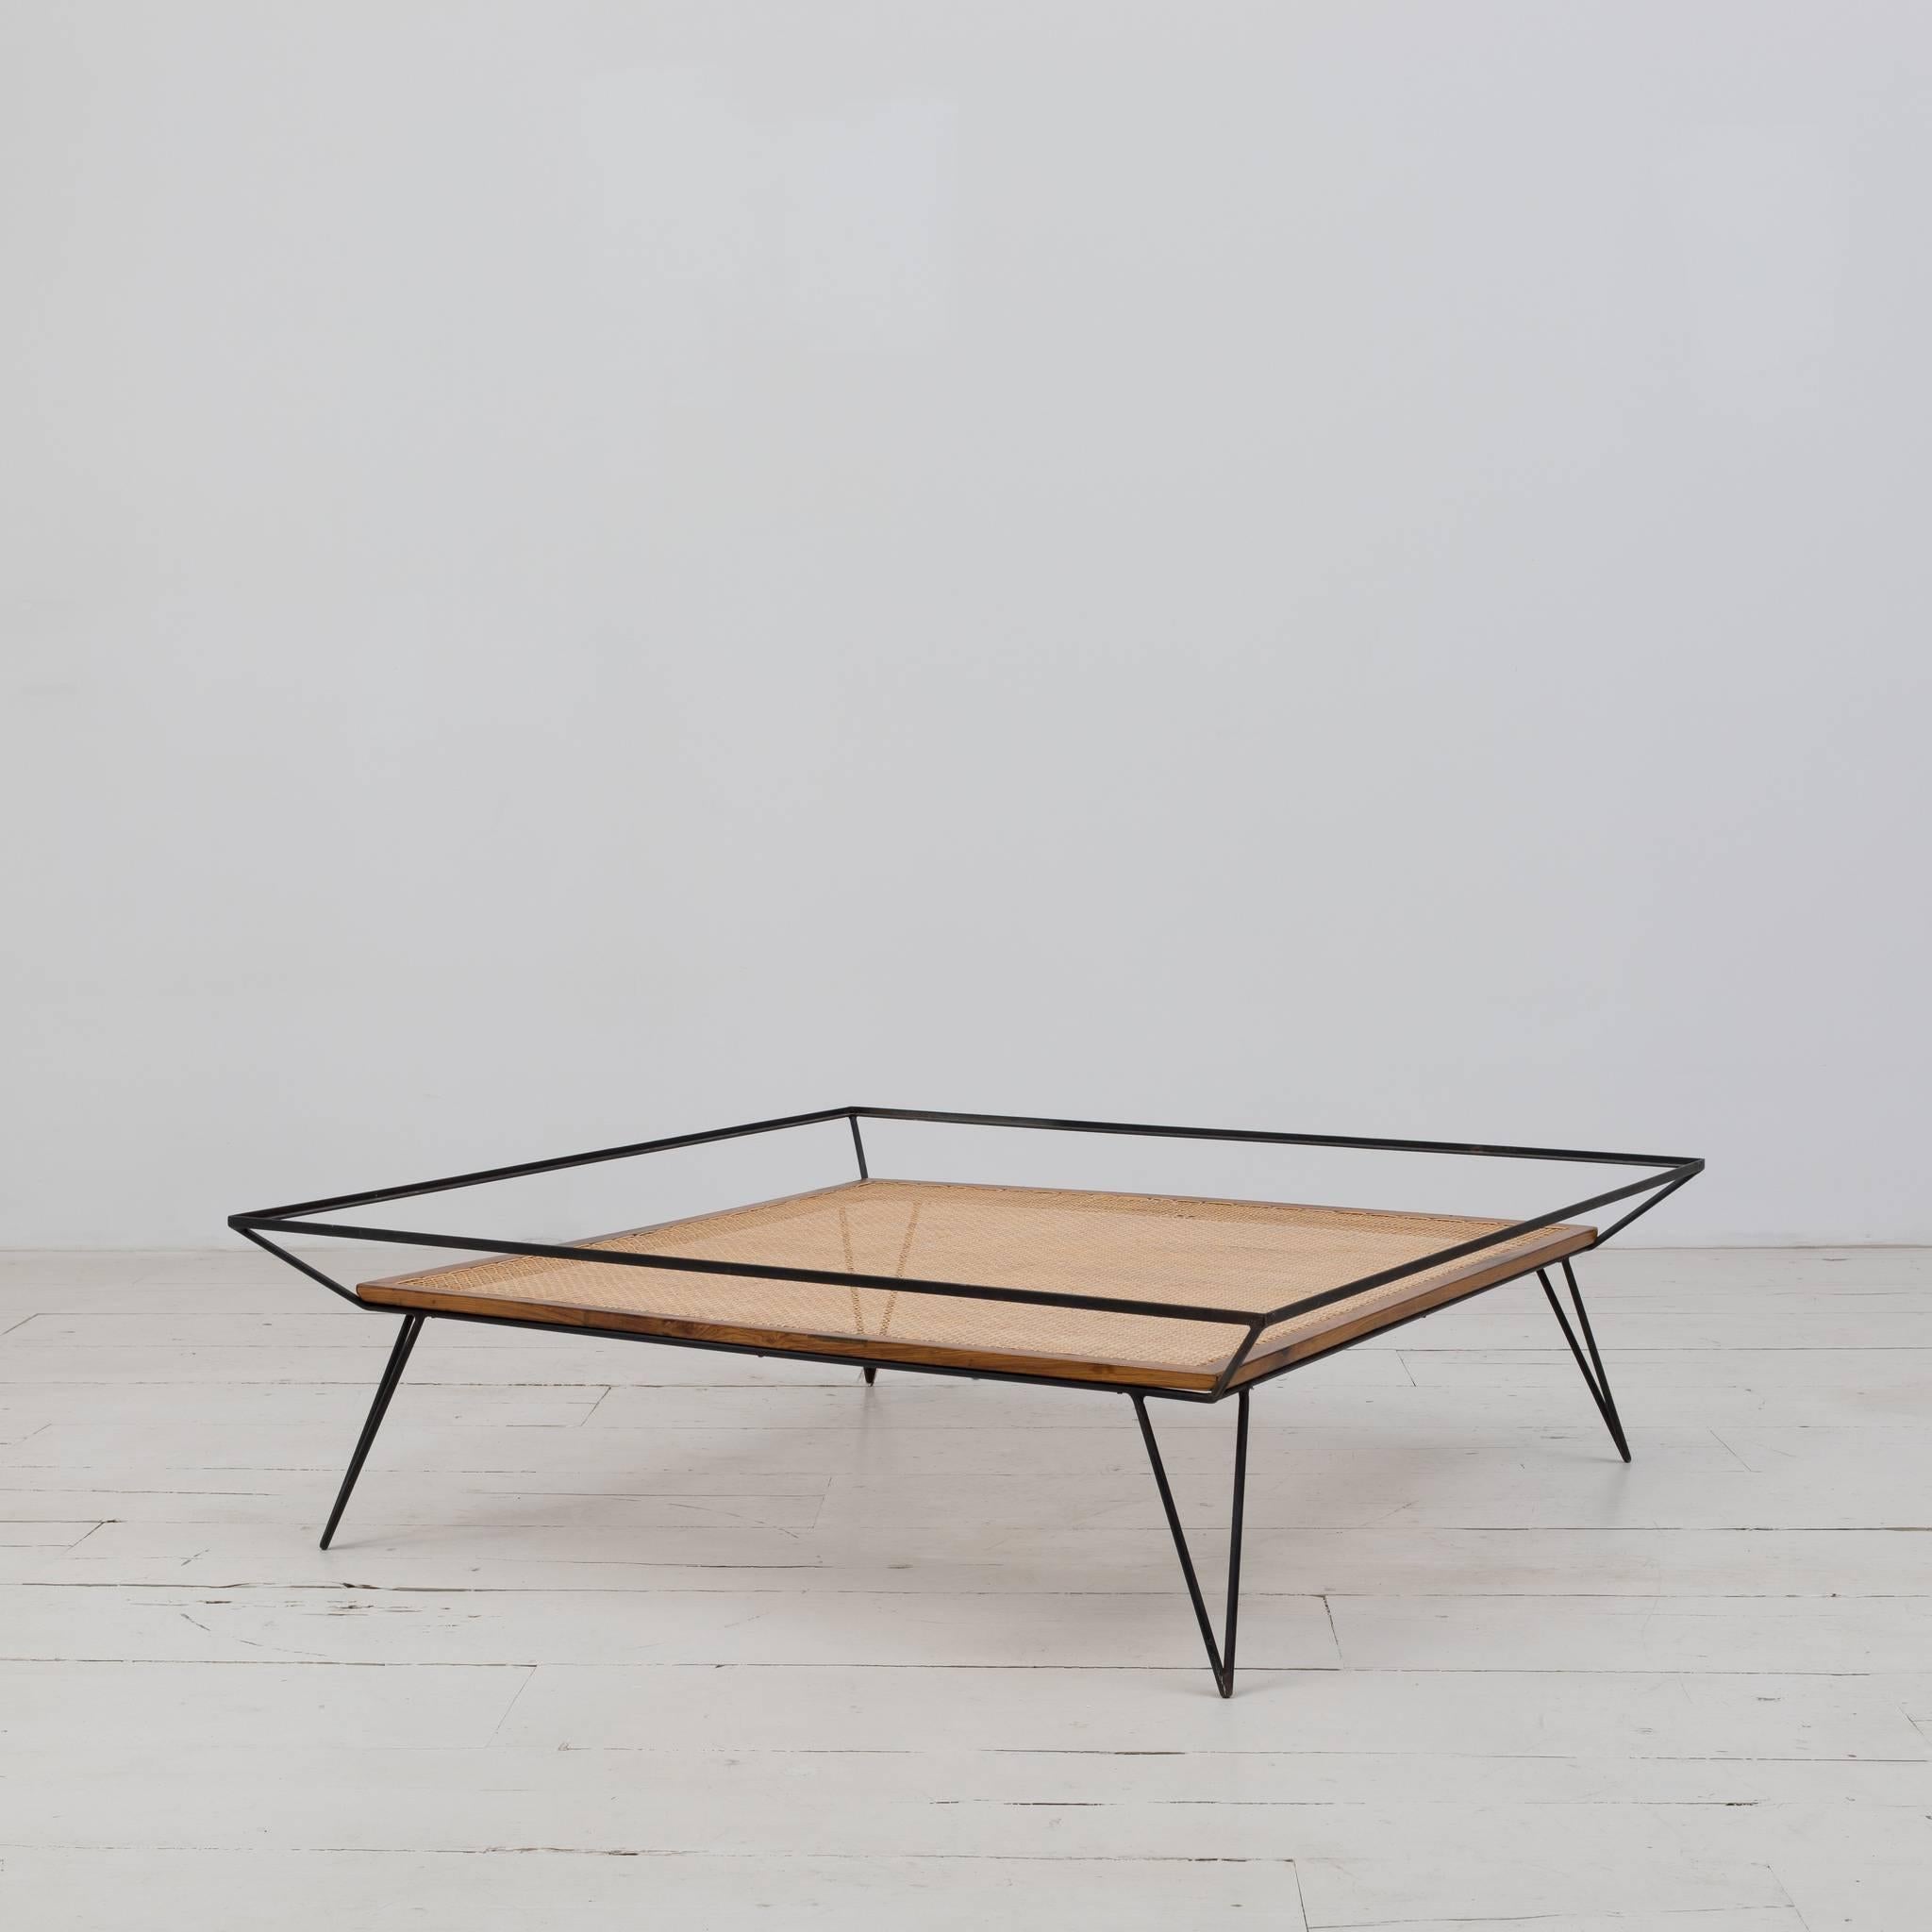 Exquisite Vintage coffee table designed by Martin Eisler and Carlo Hauner in the 1950s. Iron base structure, solid Caviuna wood, and natural cane. 

Size: W 47